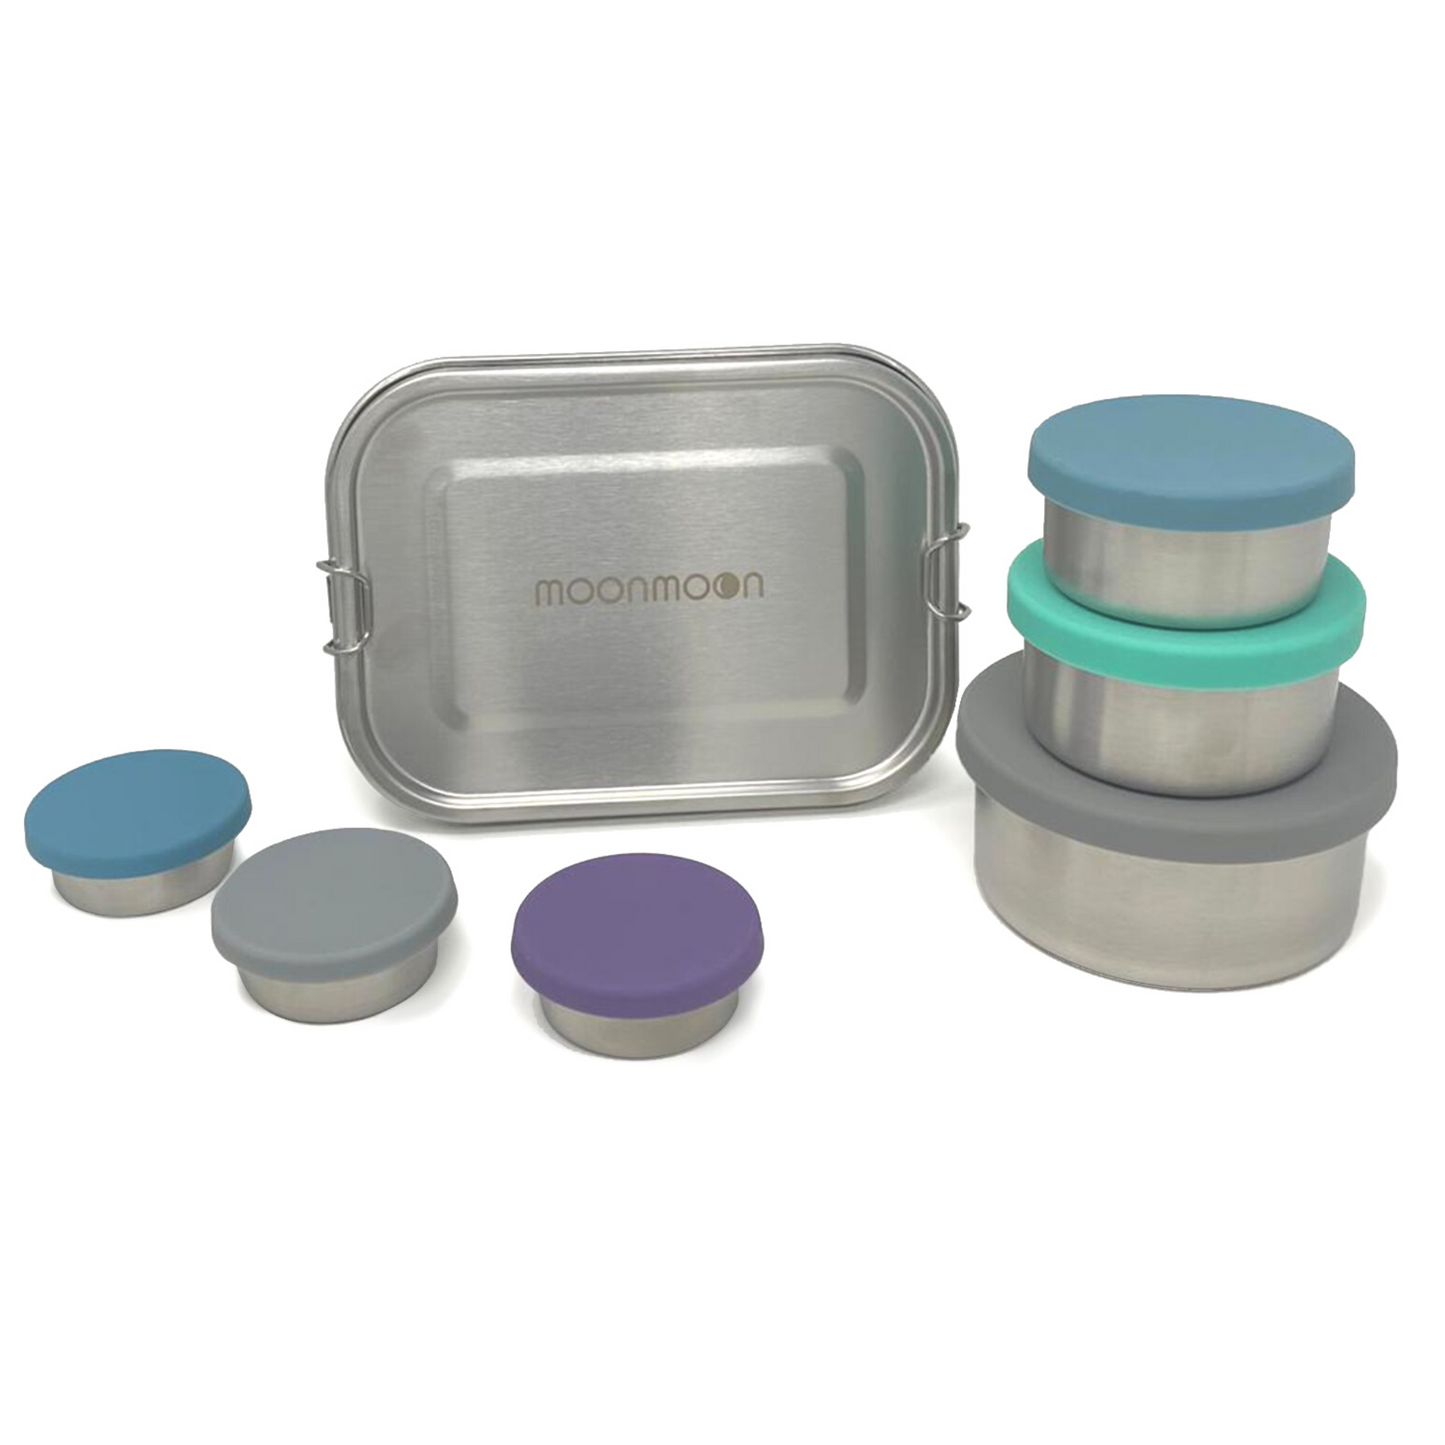 Moonmoon, Stainless Steel Lunch Box, Metal Bento Boxes, Stainless Steel Food Container, Stainless Steel Snack Pots, Dressing Pots, Small Sauce Pot with Lid, Moommoom, Metal Lunch Box